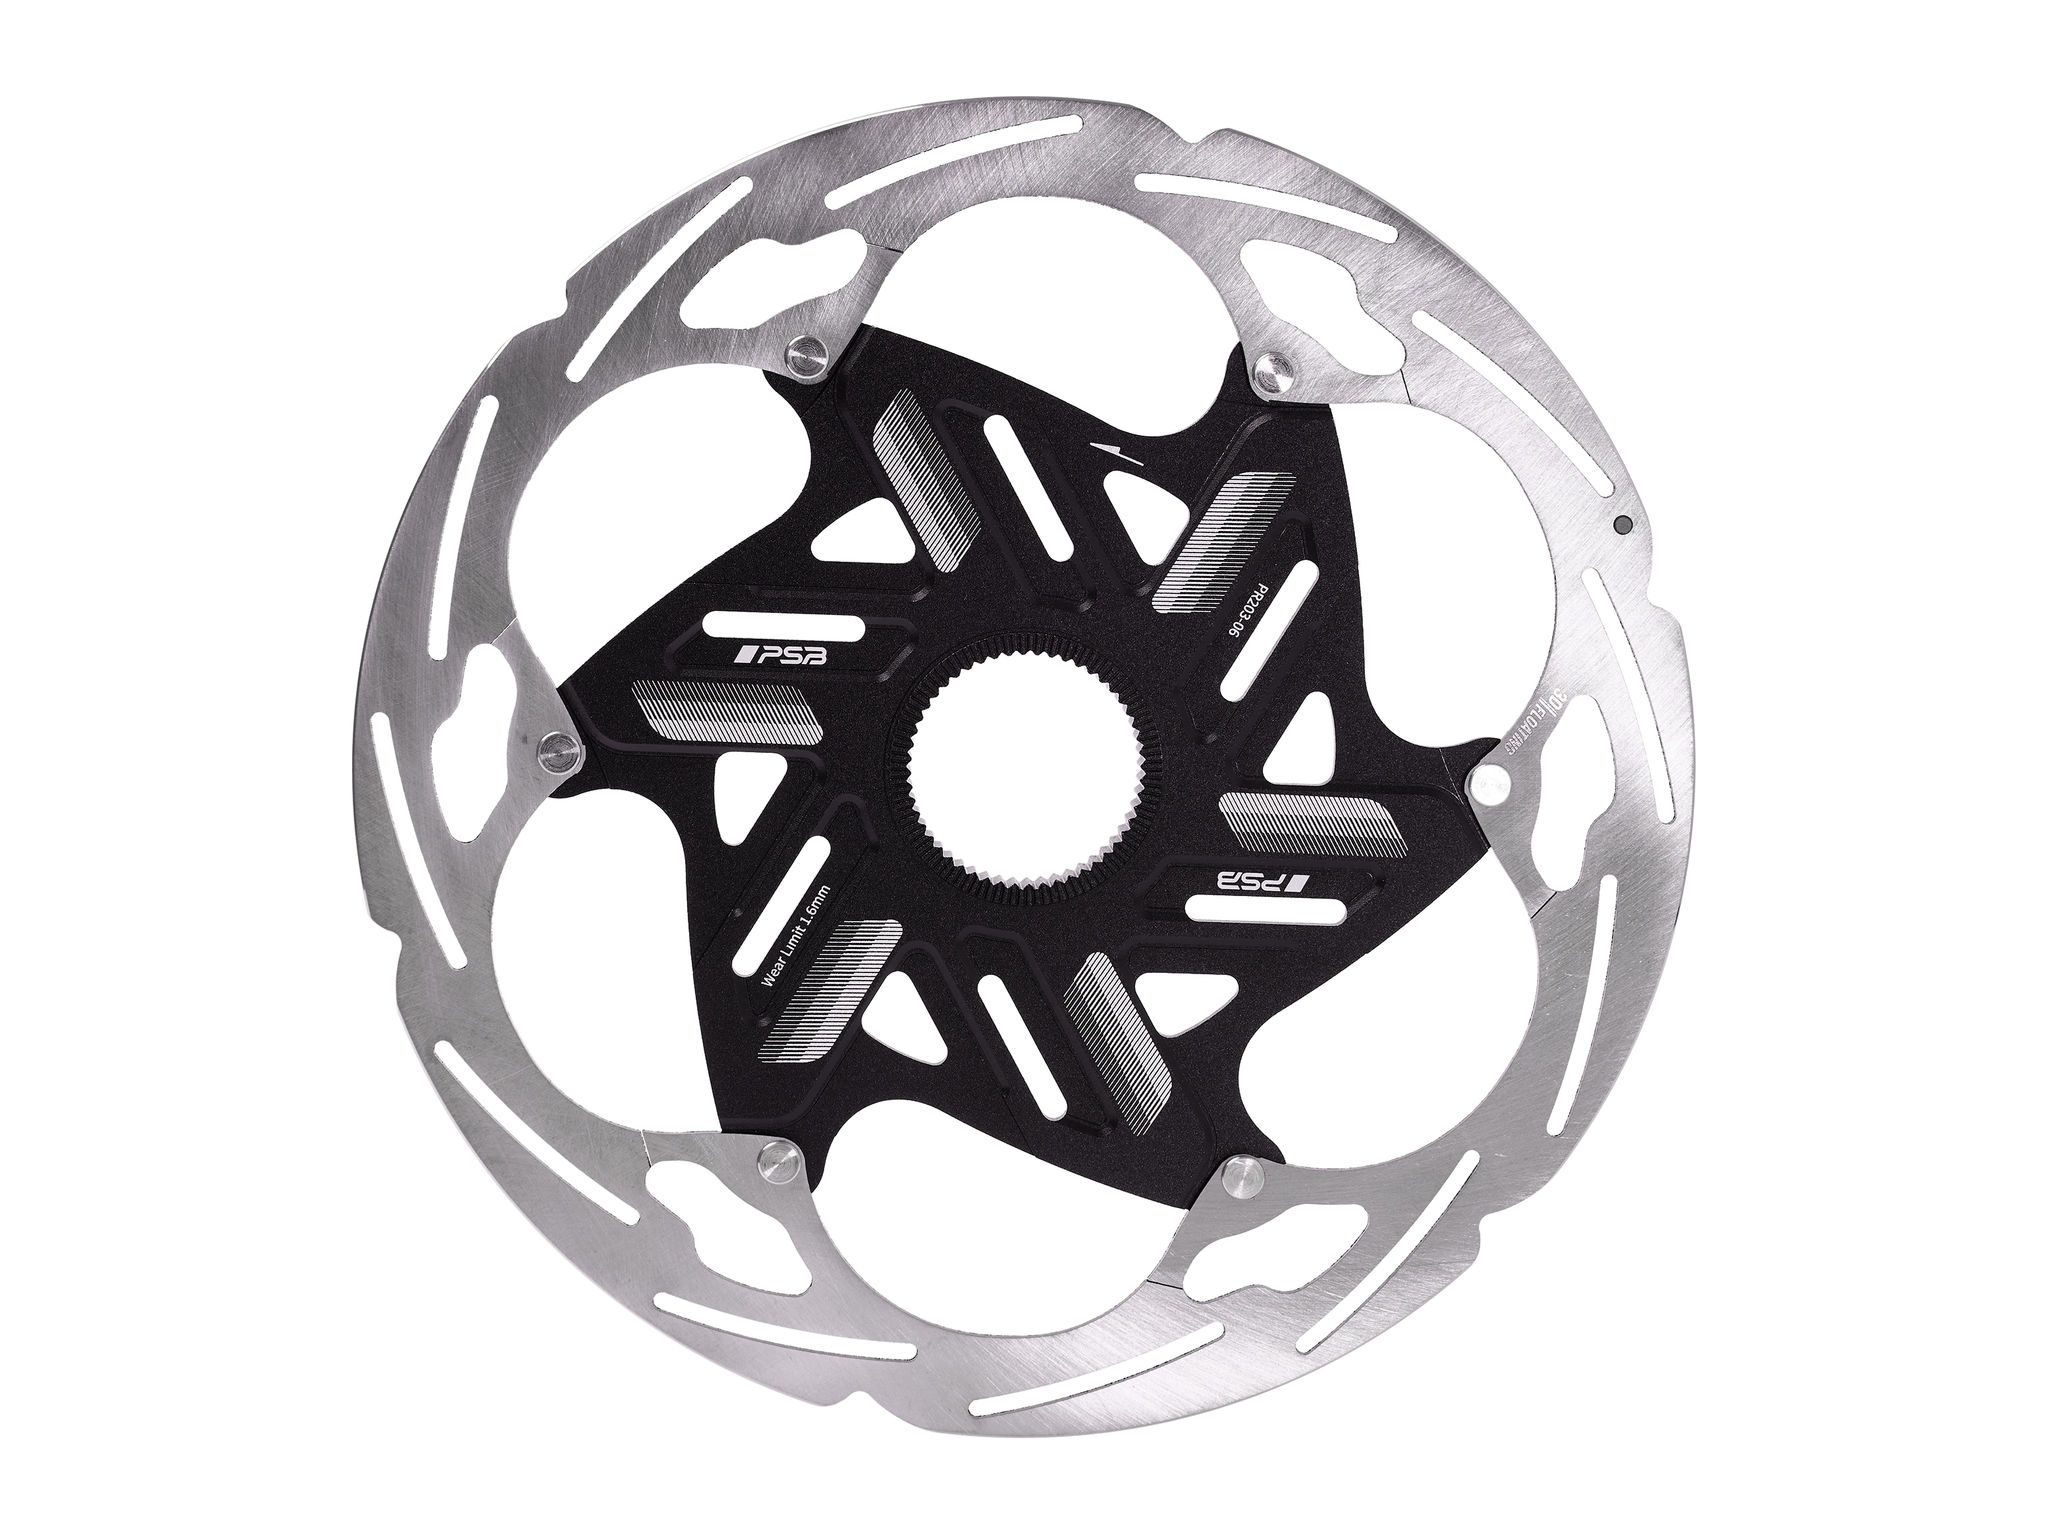 Two-piece 3D Floating Rotor